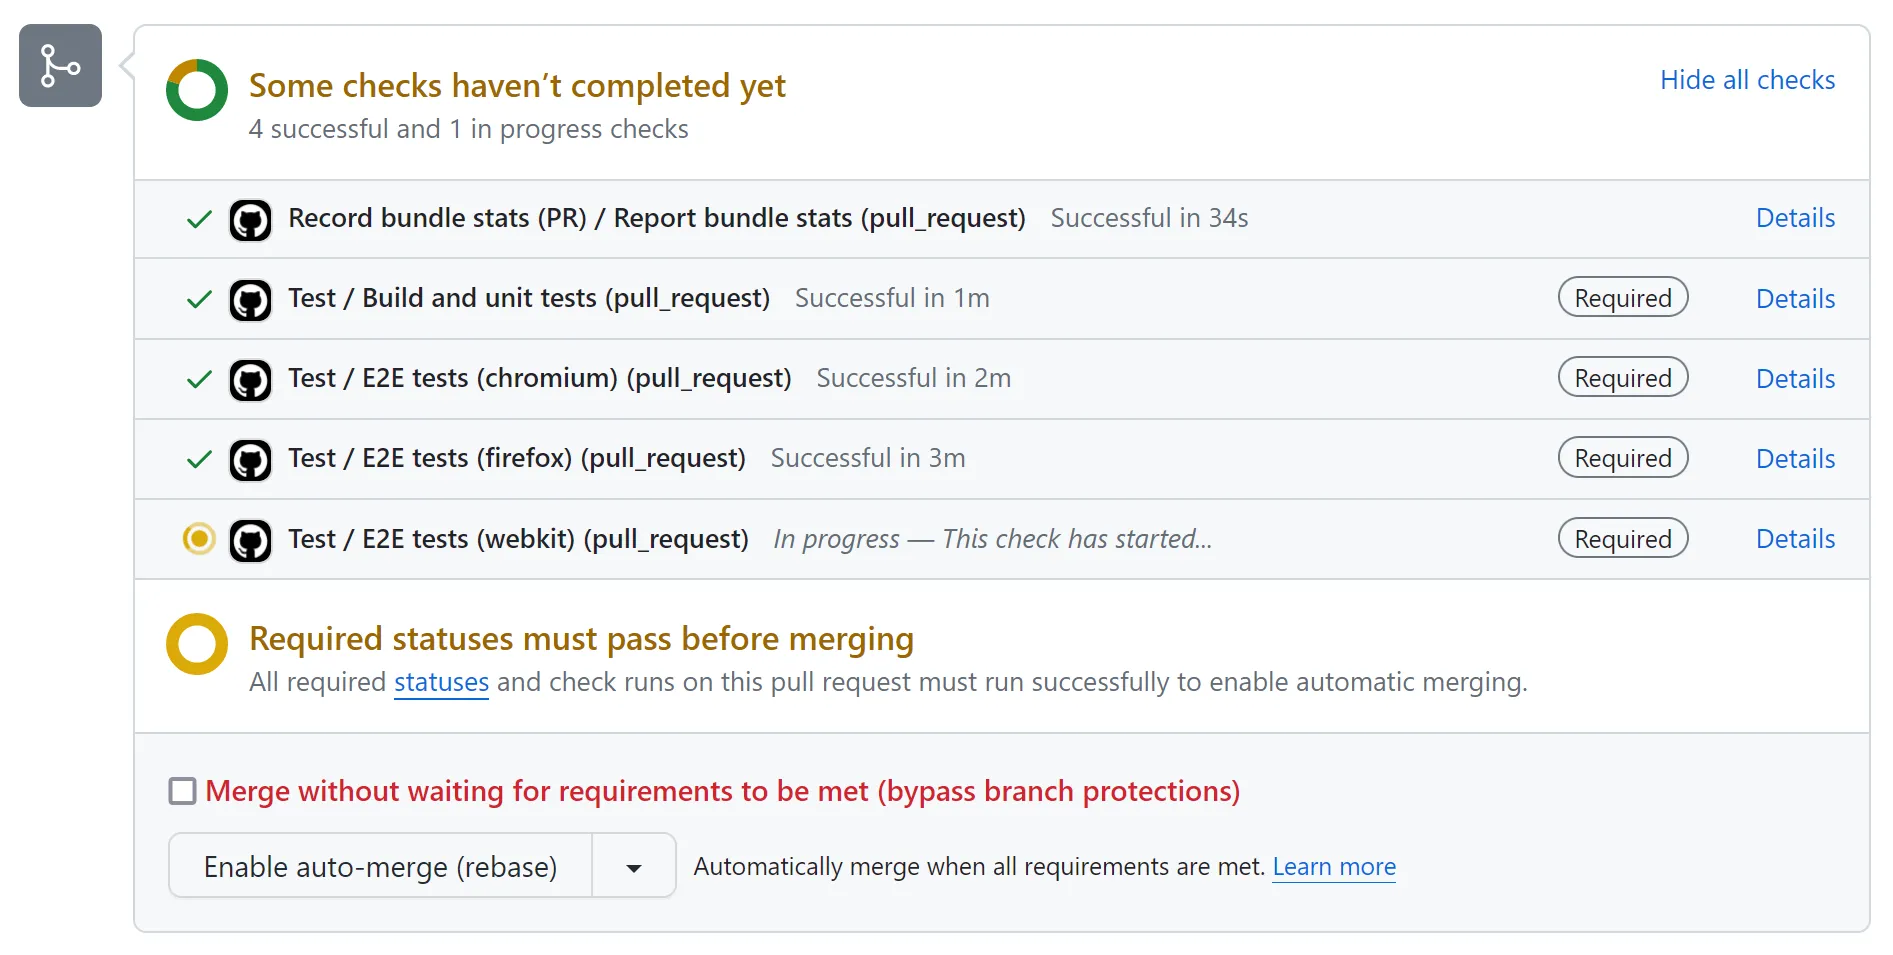 Screenshot of GitHub pull request checks dialog with entries such as
"Test / E2E tests (chromium)" and "Test / E2E tests (firefox)"